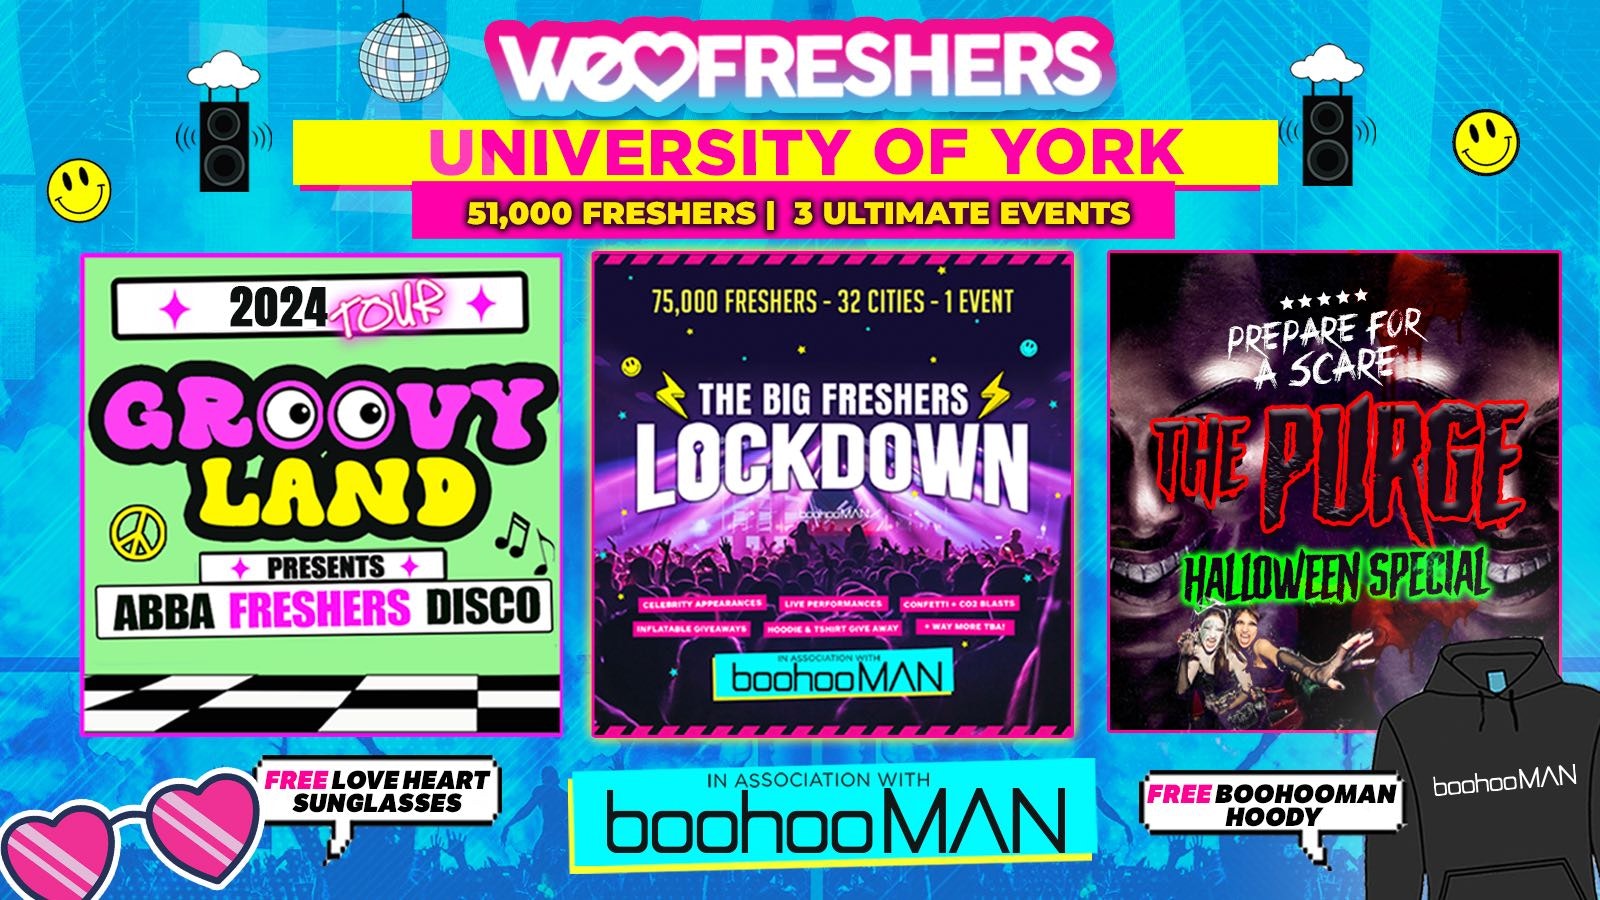 WE LOVE – UNI OF YORK FRESHERS 2024 in association with boohooMAN – 3 EVENTS❗